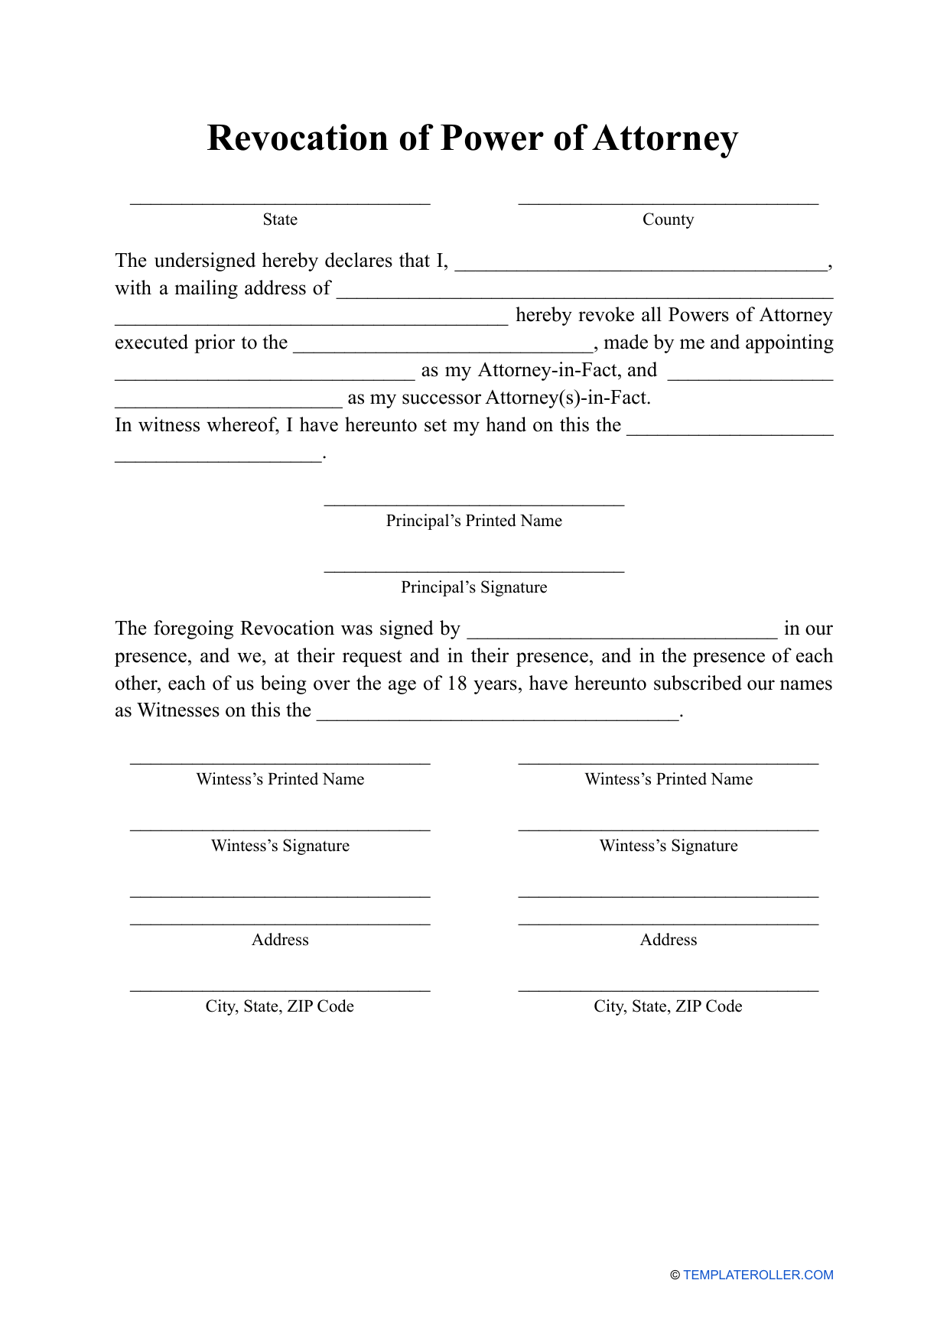 Revocation of Power of Attorney Template, Page 1